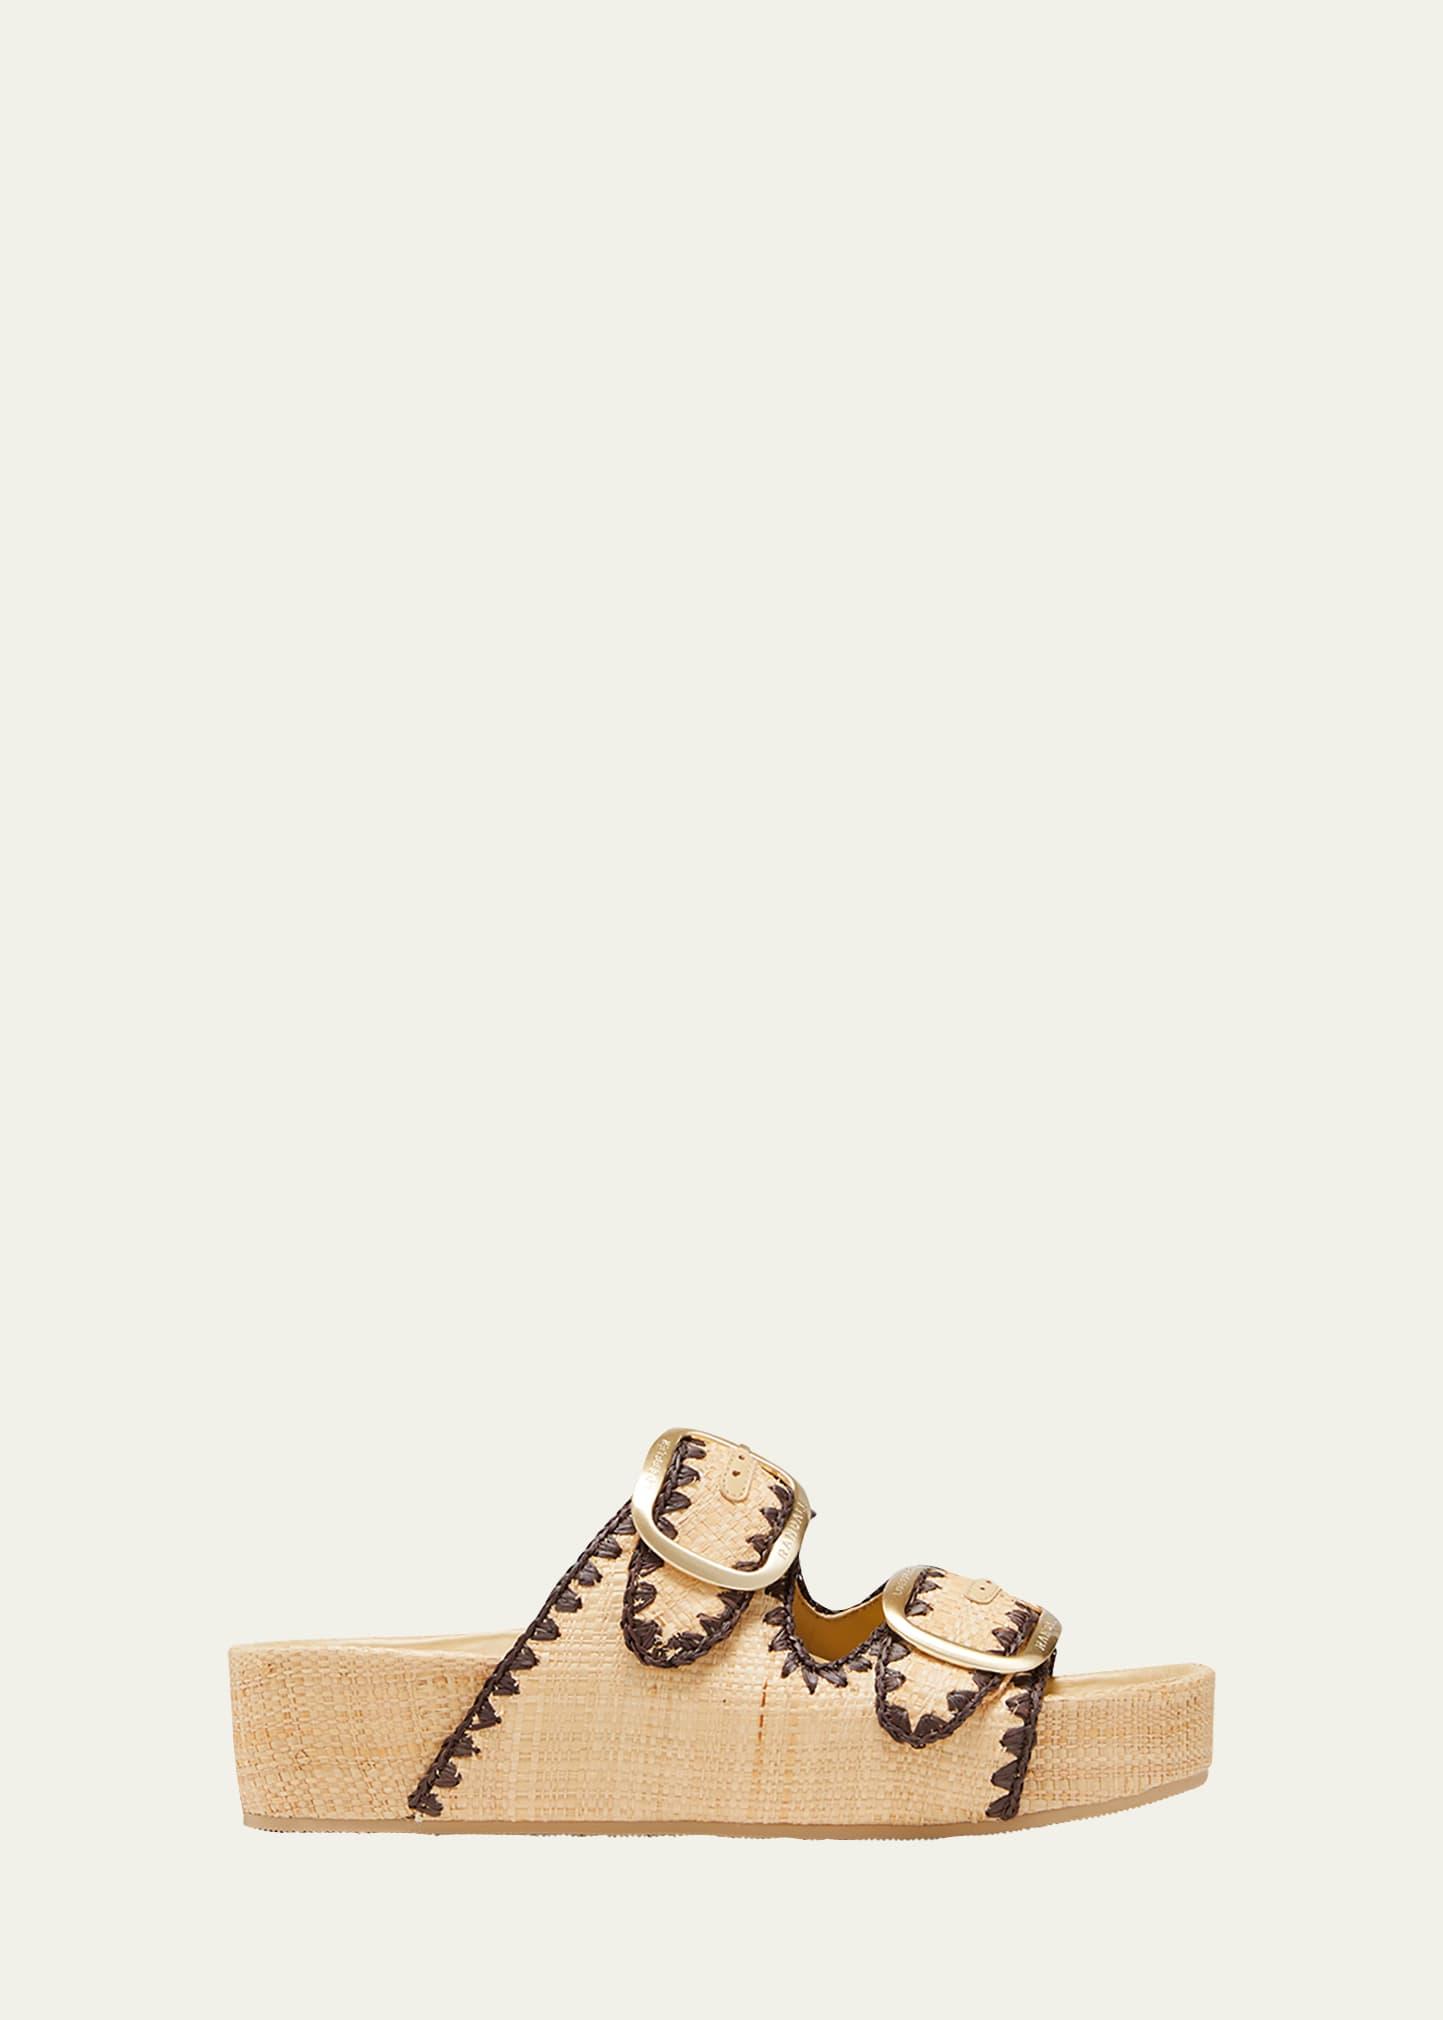 Loeffler Randall Theo Double Buckle Raffia Sandals in Natural | Lyst